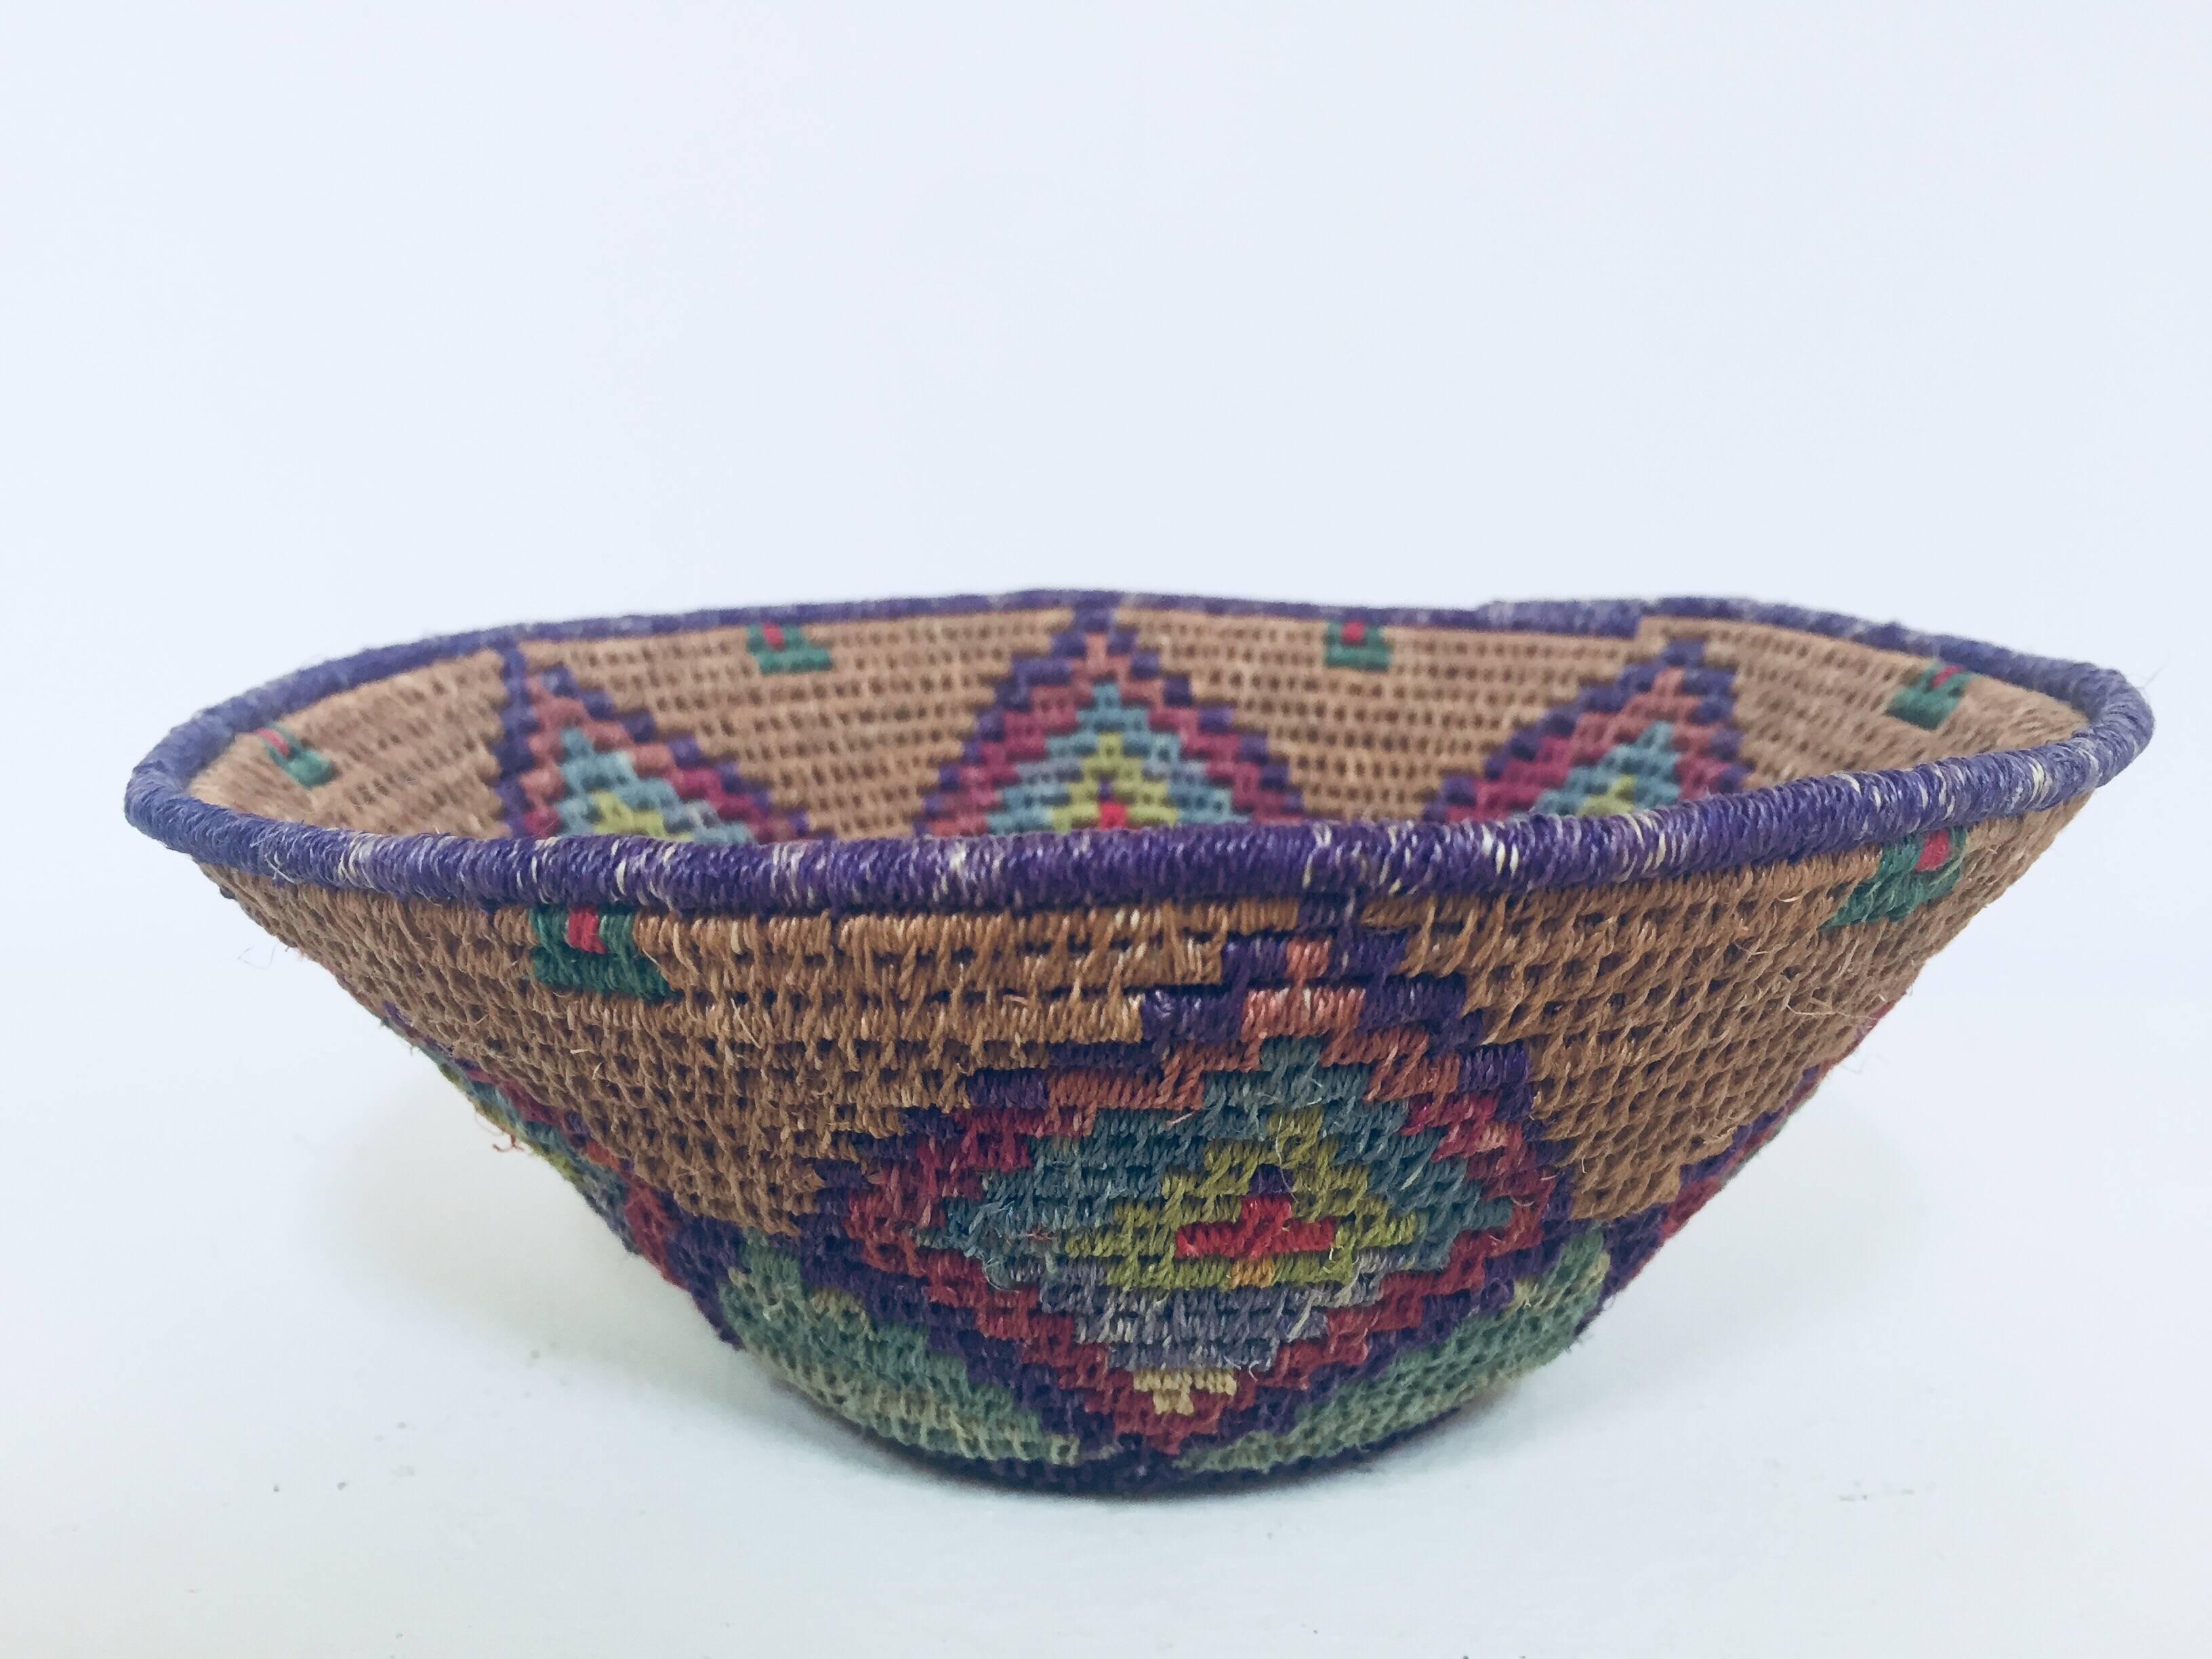 Native American polychrome seagrass and silk woven basket. 
Beautiful round shape with geometric designs woven into the sides. 
Very fine craft work, great Folk Art collector piece.
Dimensions: 7